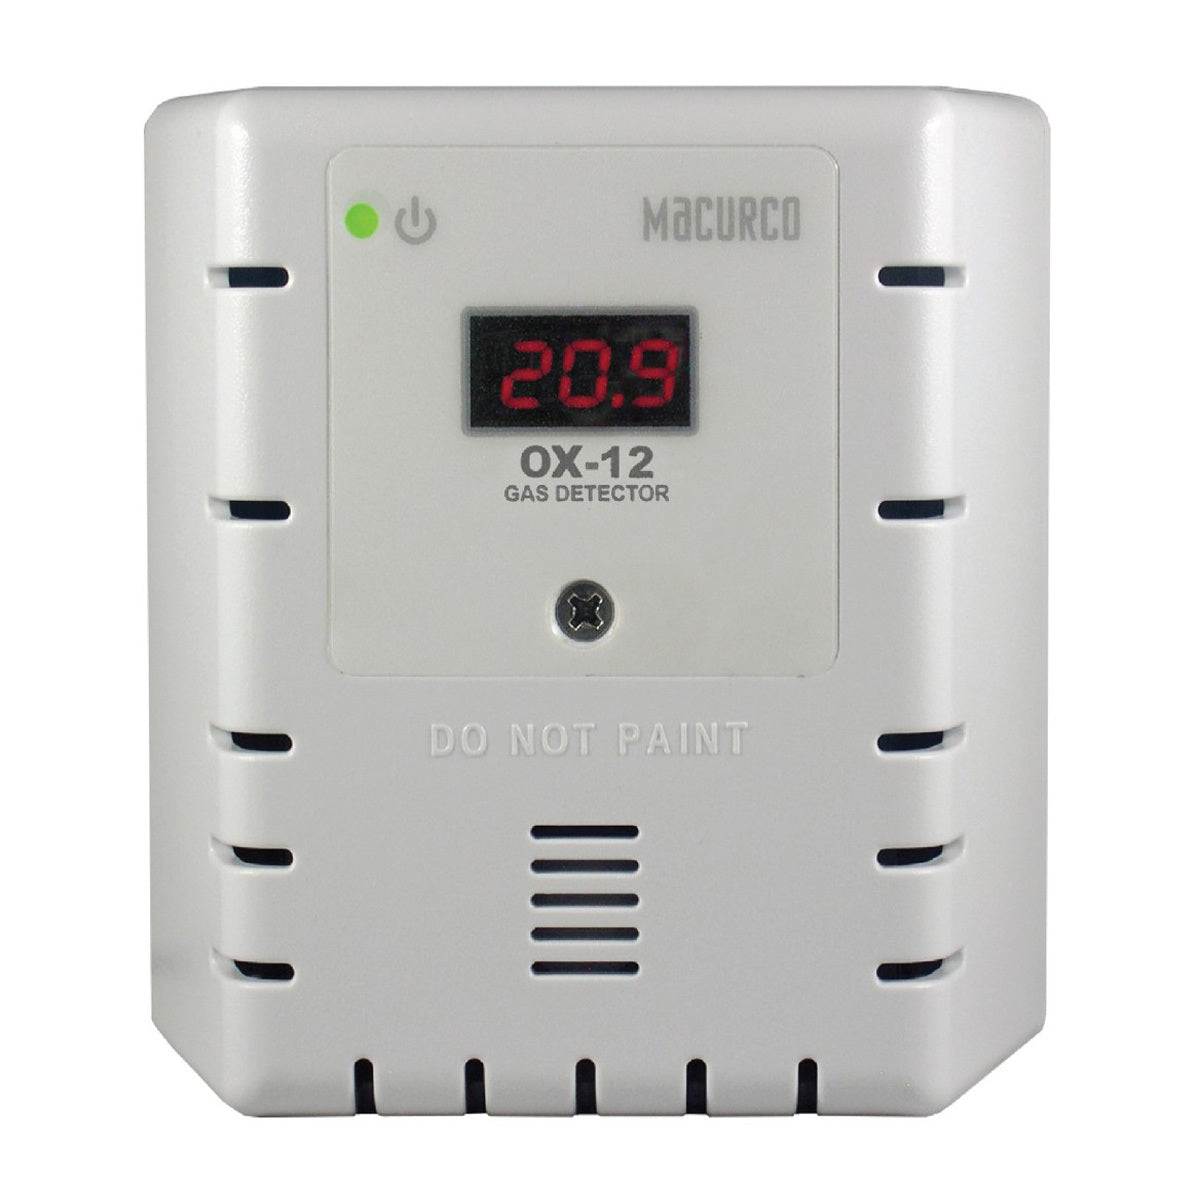 Macurco™ Gas Detection OX-12 WHITE Fixed Oxygen Detector-eSafety Supplies, Inc